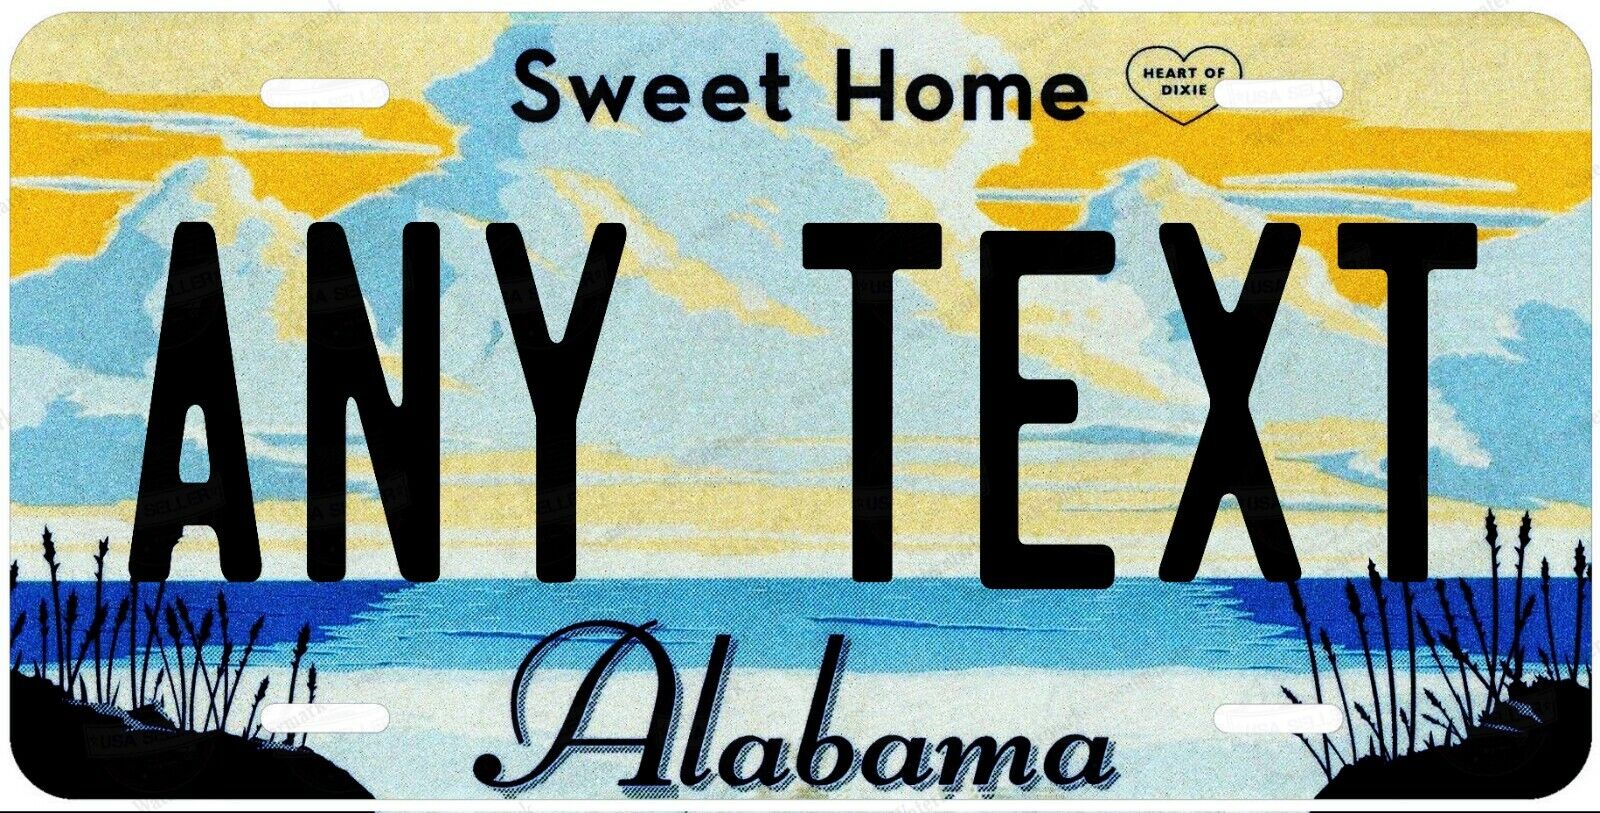 Any State License Plate Tag Personalized Custom Any Text Auto Car ATV Bicycle